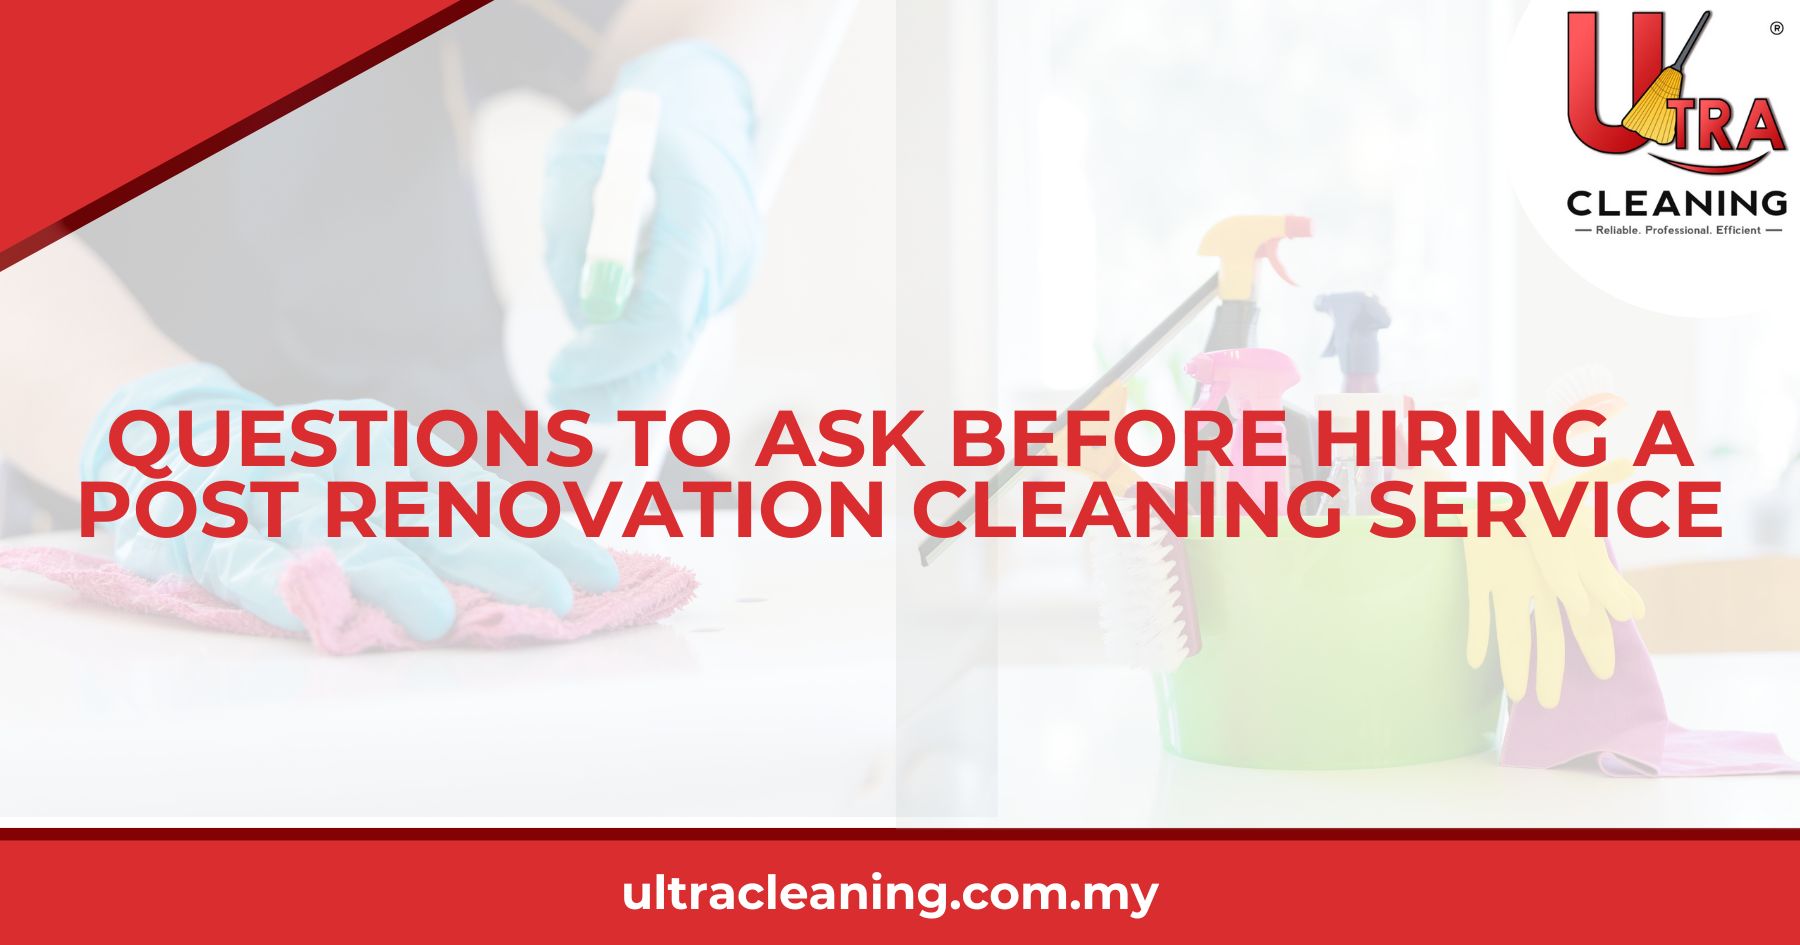 Questions To Ask Before Hiring a Post Renovation Cleaning Service